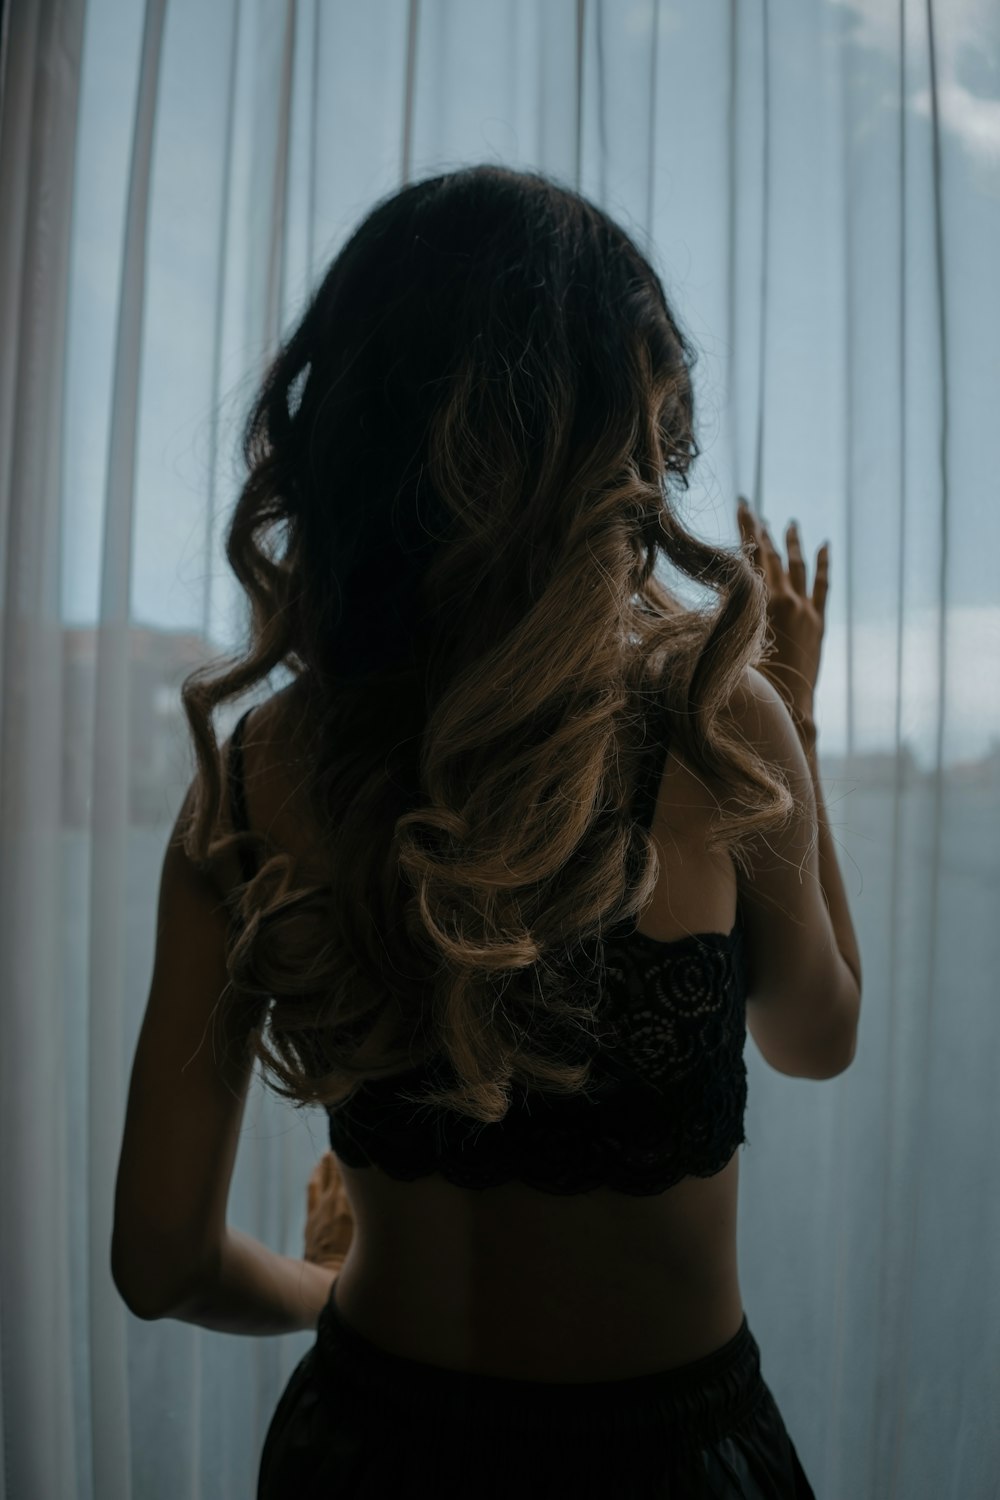 Woman In Black Lace Lingerie Near The Window Stock Photo, Picture and  Royalty Free Image. Image 53728175.